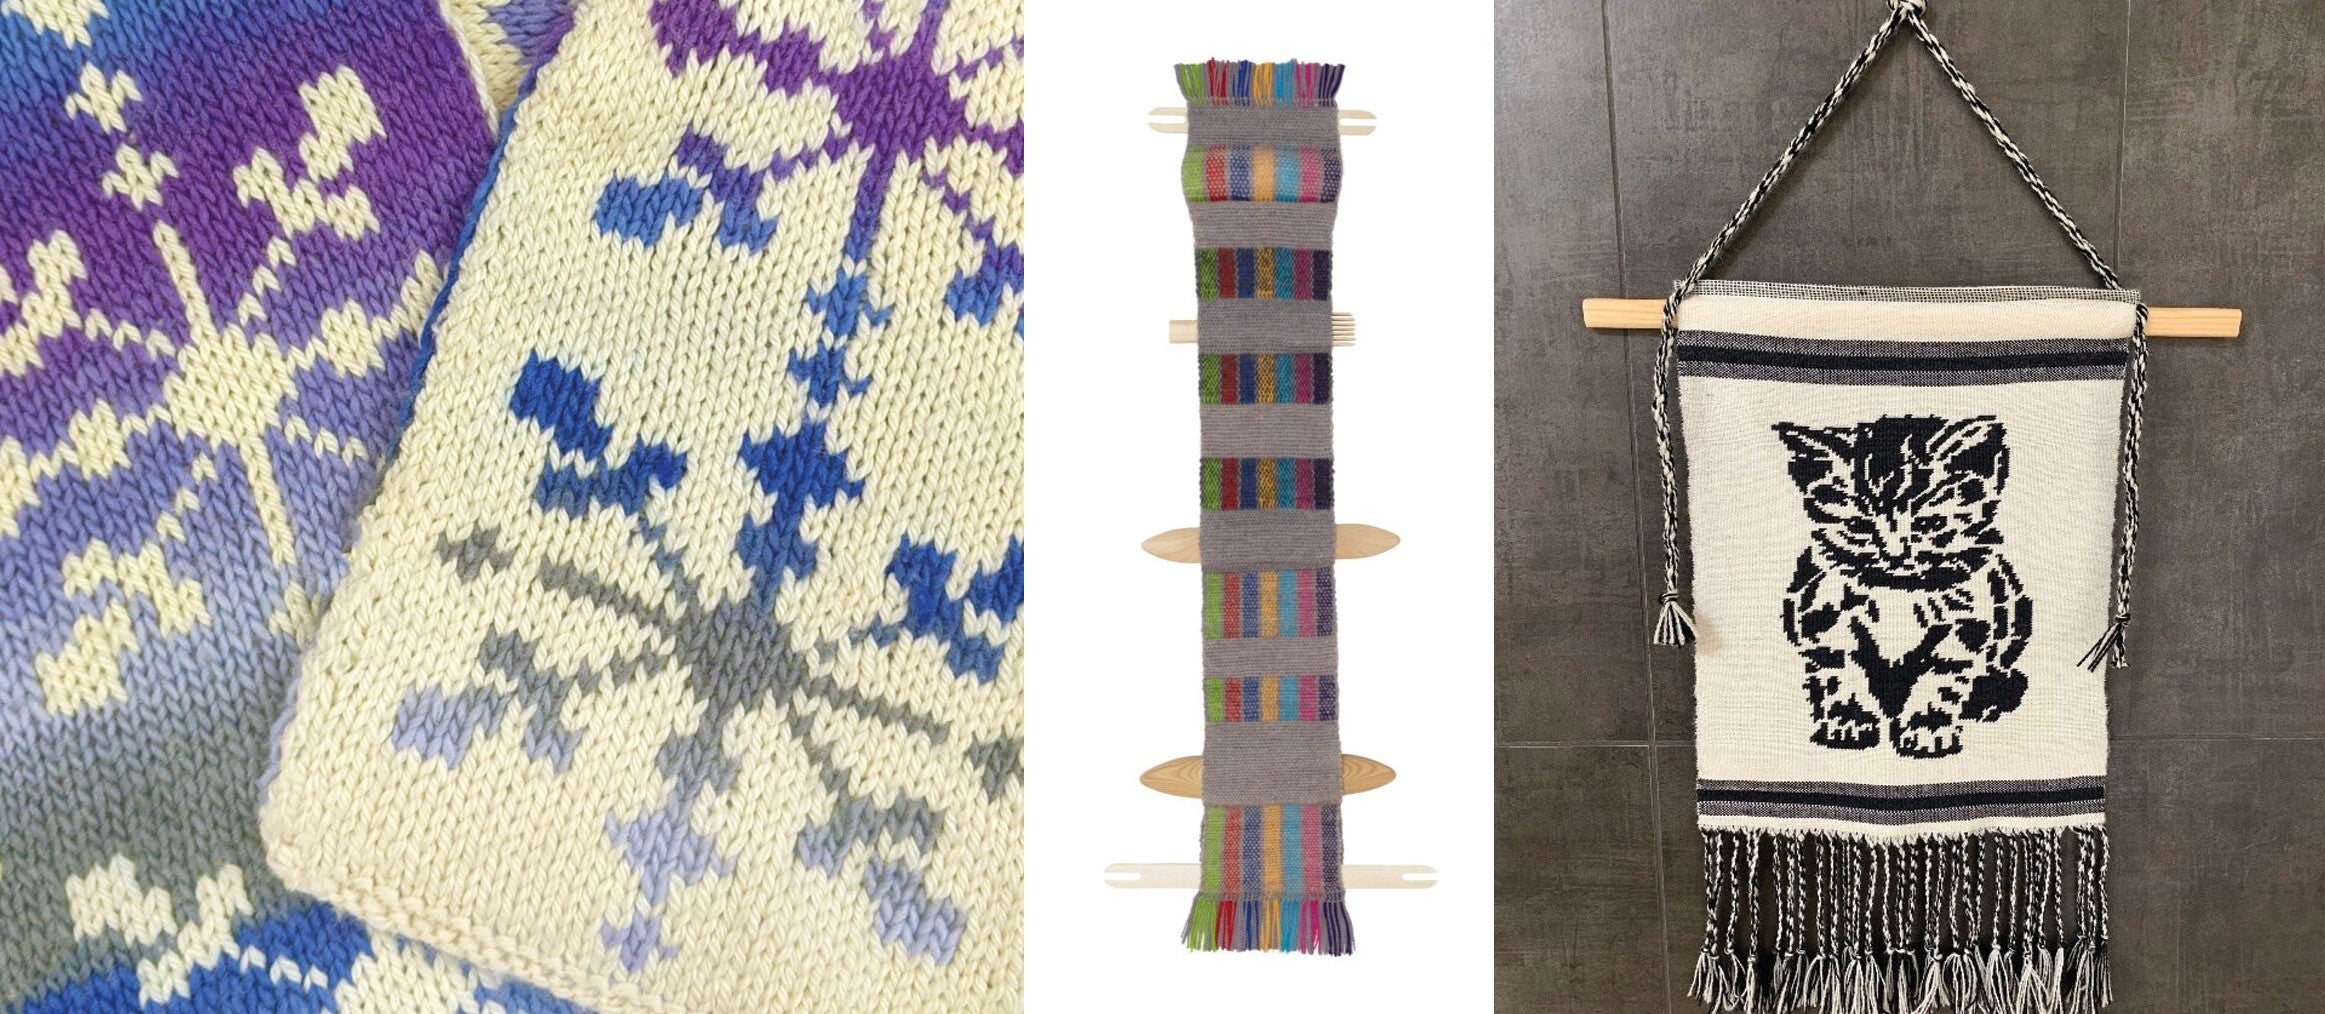 Why Knitters Will Love Weaving: Doubleweave & Double Knitting